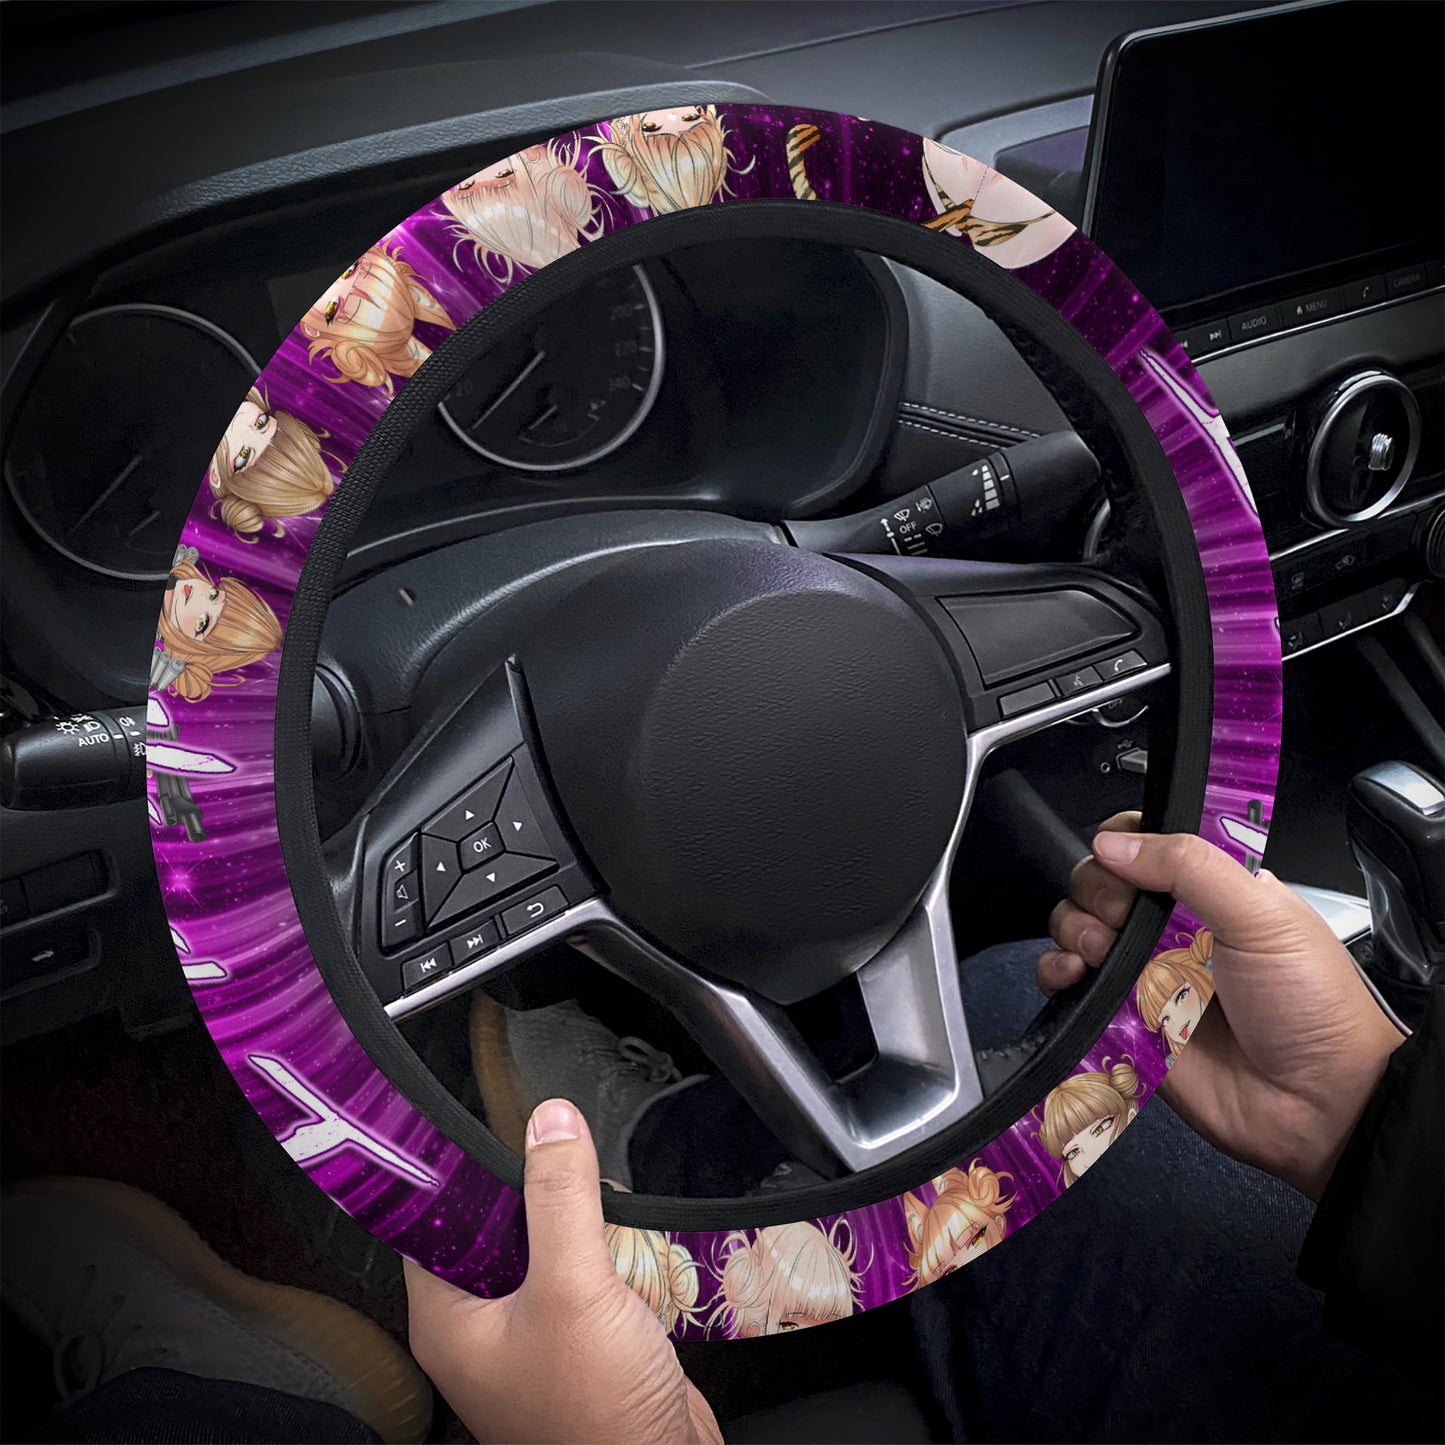 Toga Car Steering Wheel Covers